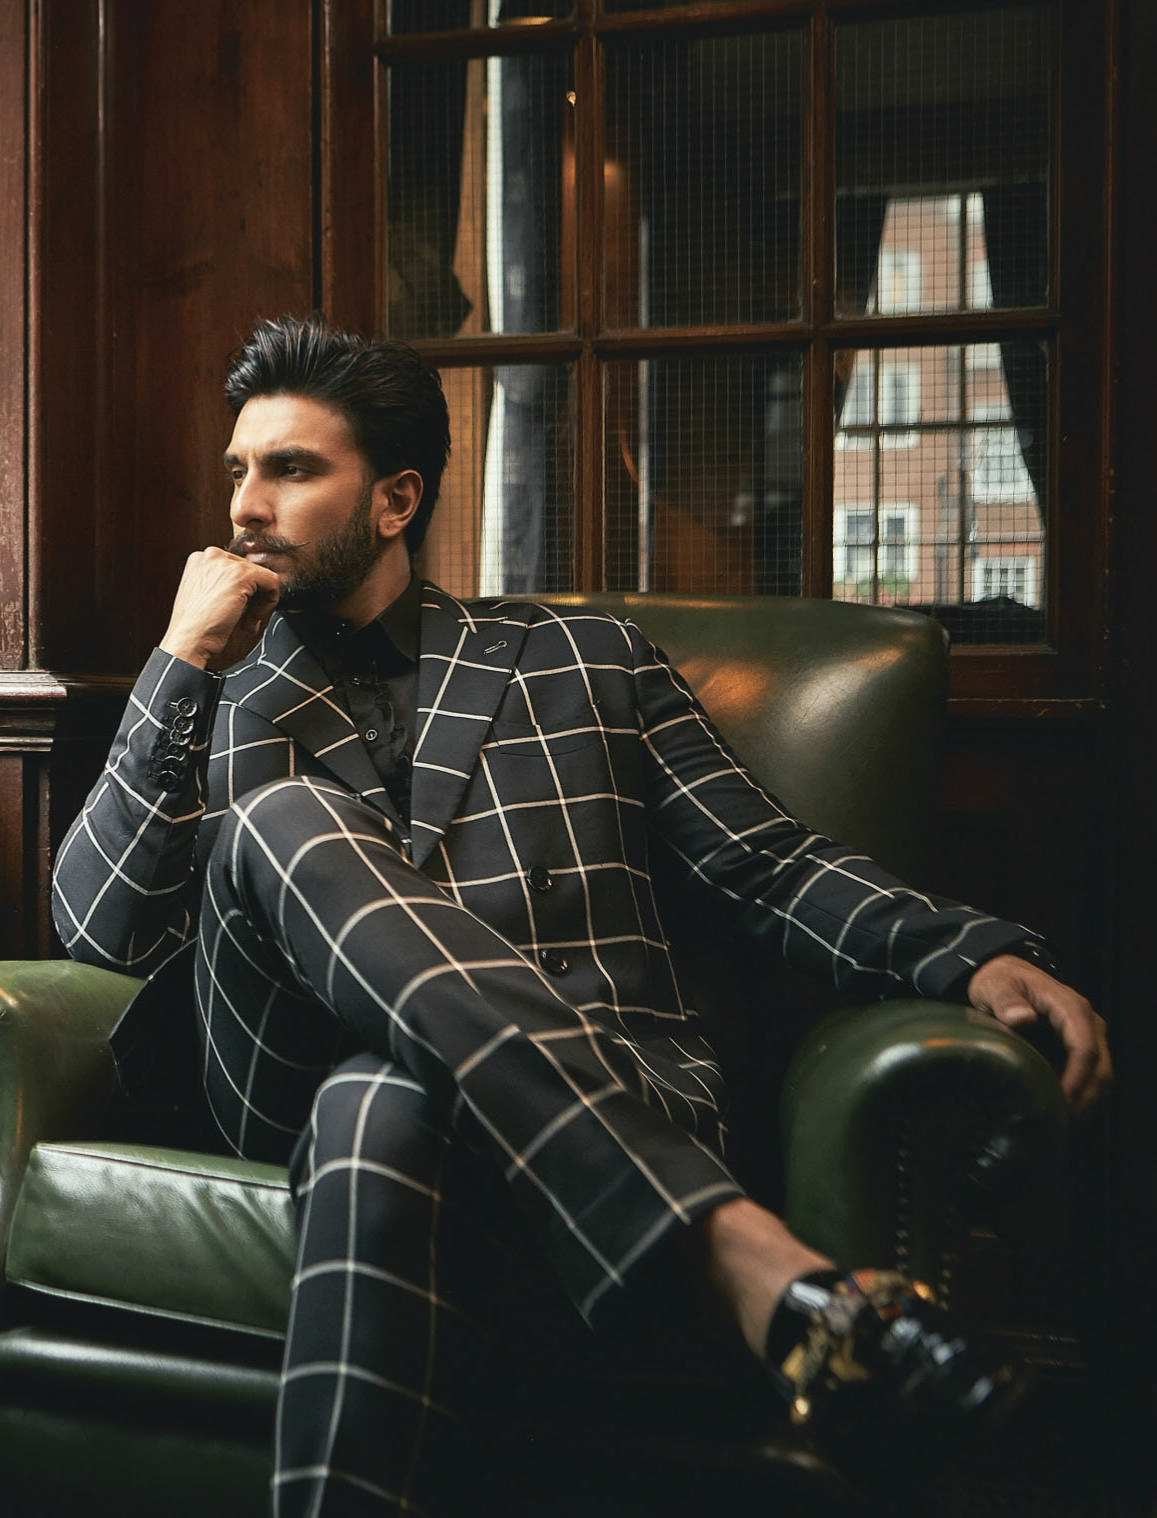 home is home, you know? — desifashion: Ranveer Singh in FIlmfare 2018 ...